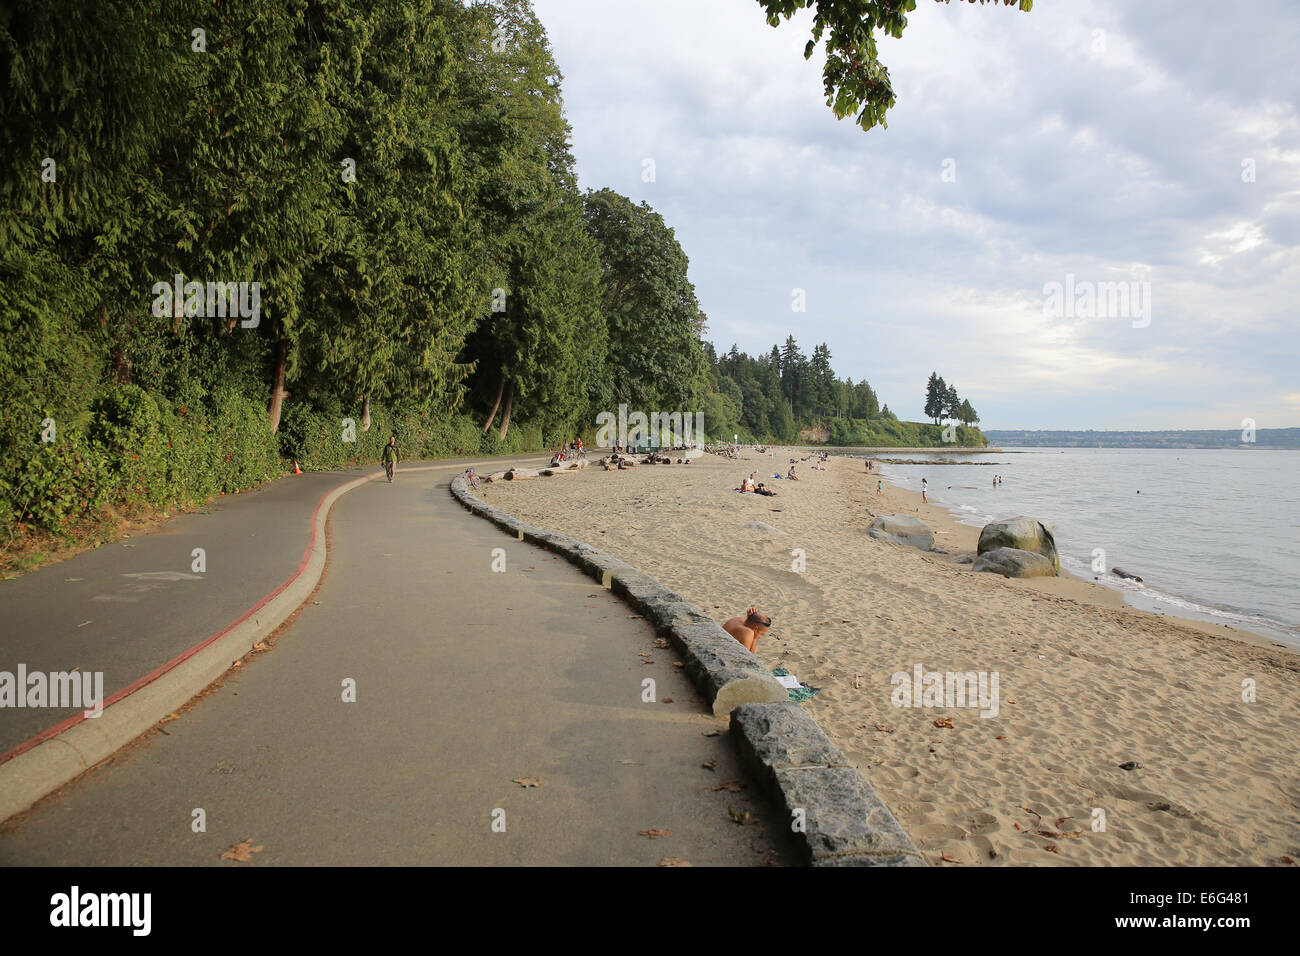 Stanley park in Vancouver is a large urban parks and a great place for rollerblading, cycling, jogging or relaxing. Stock Photo